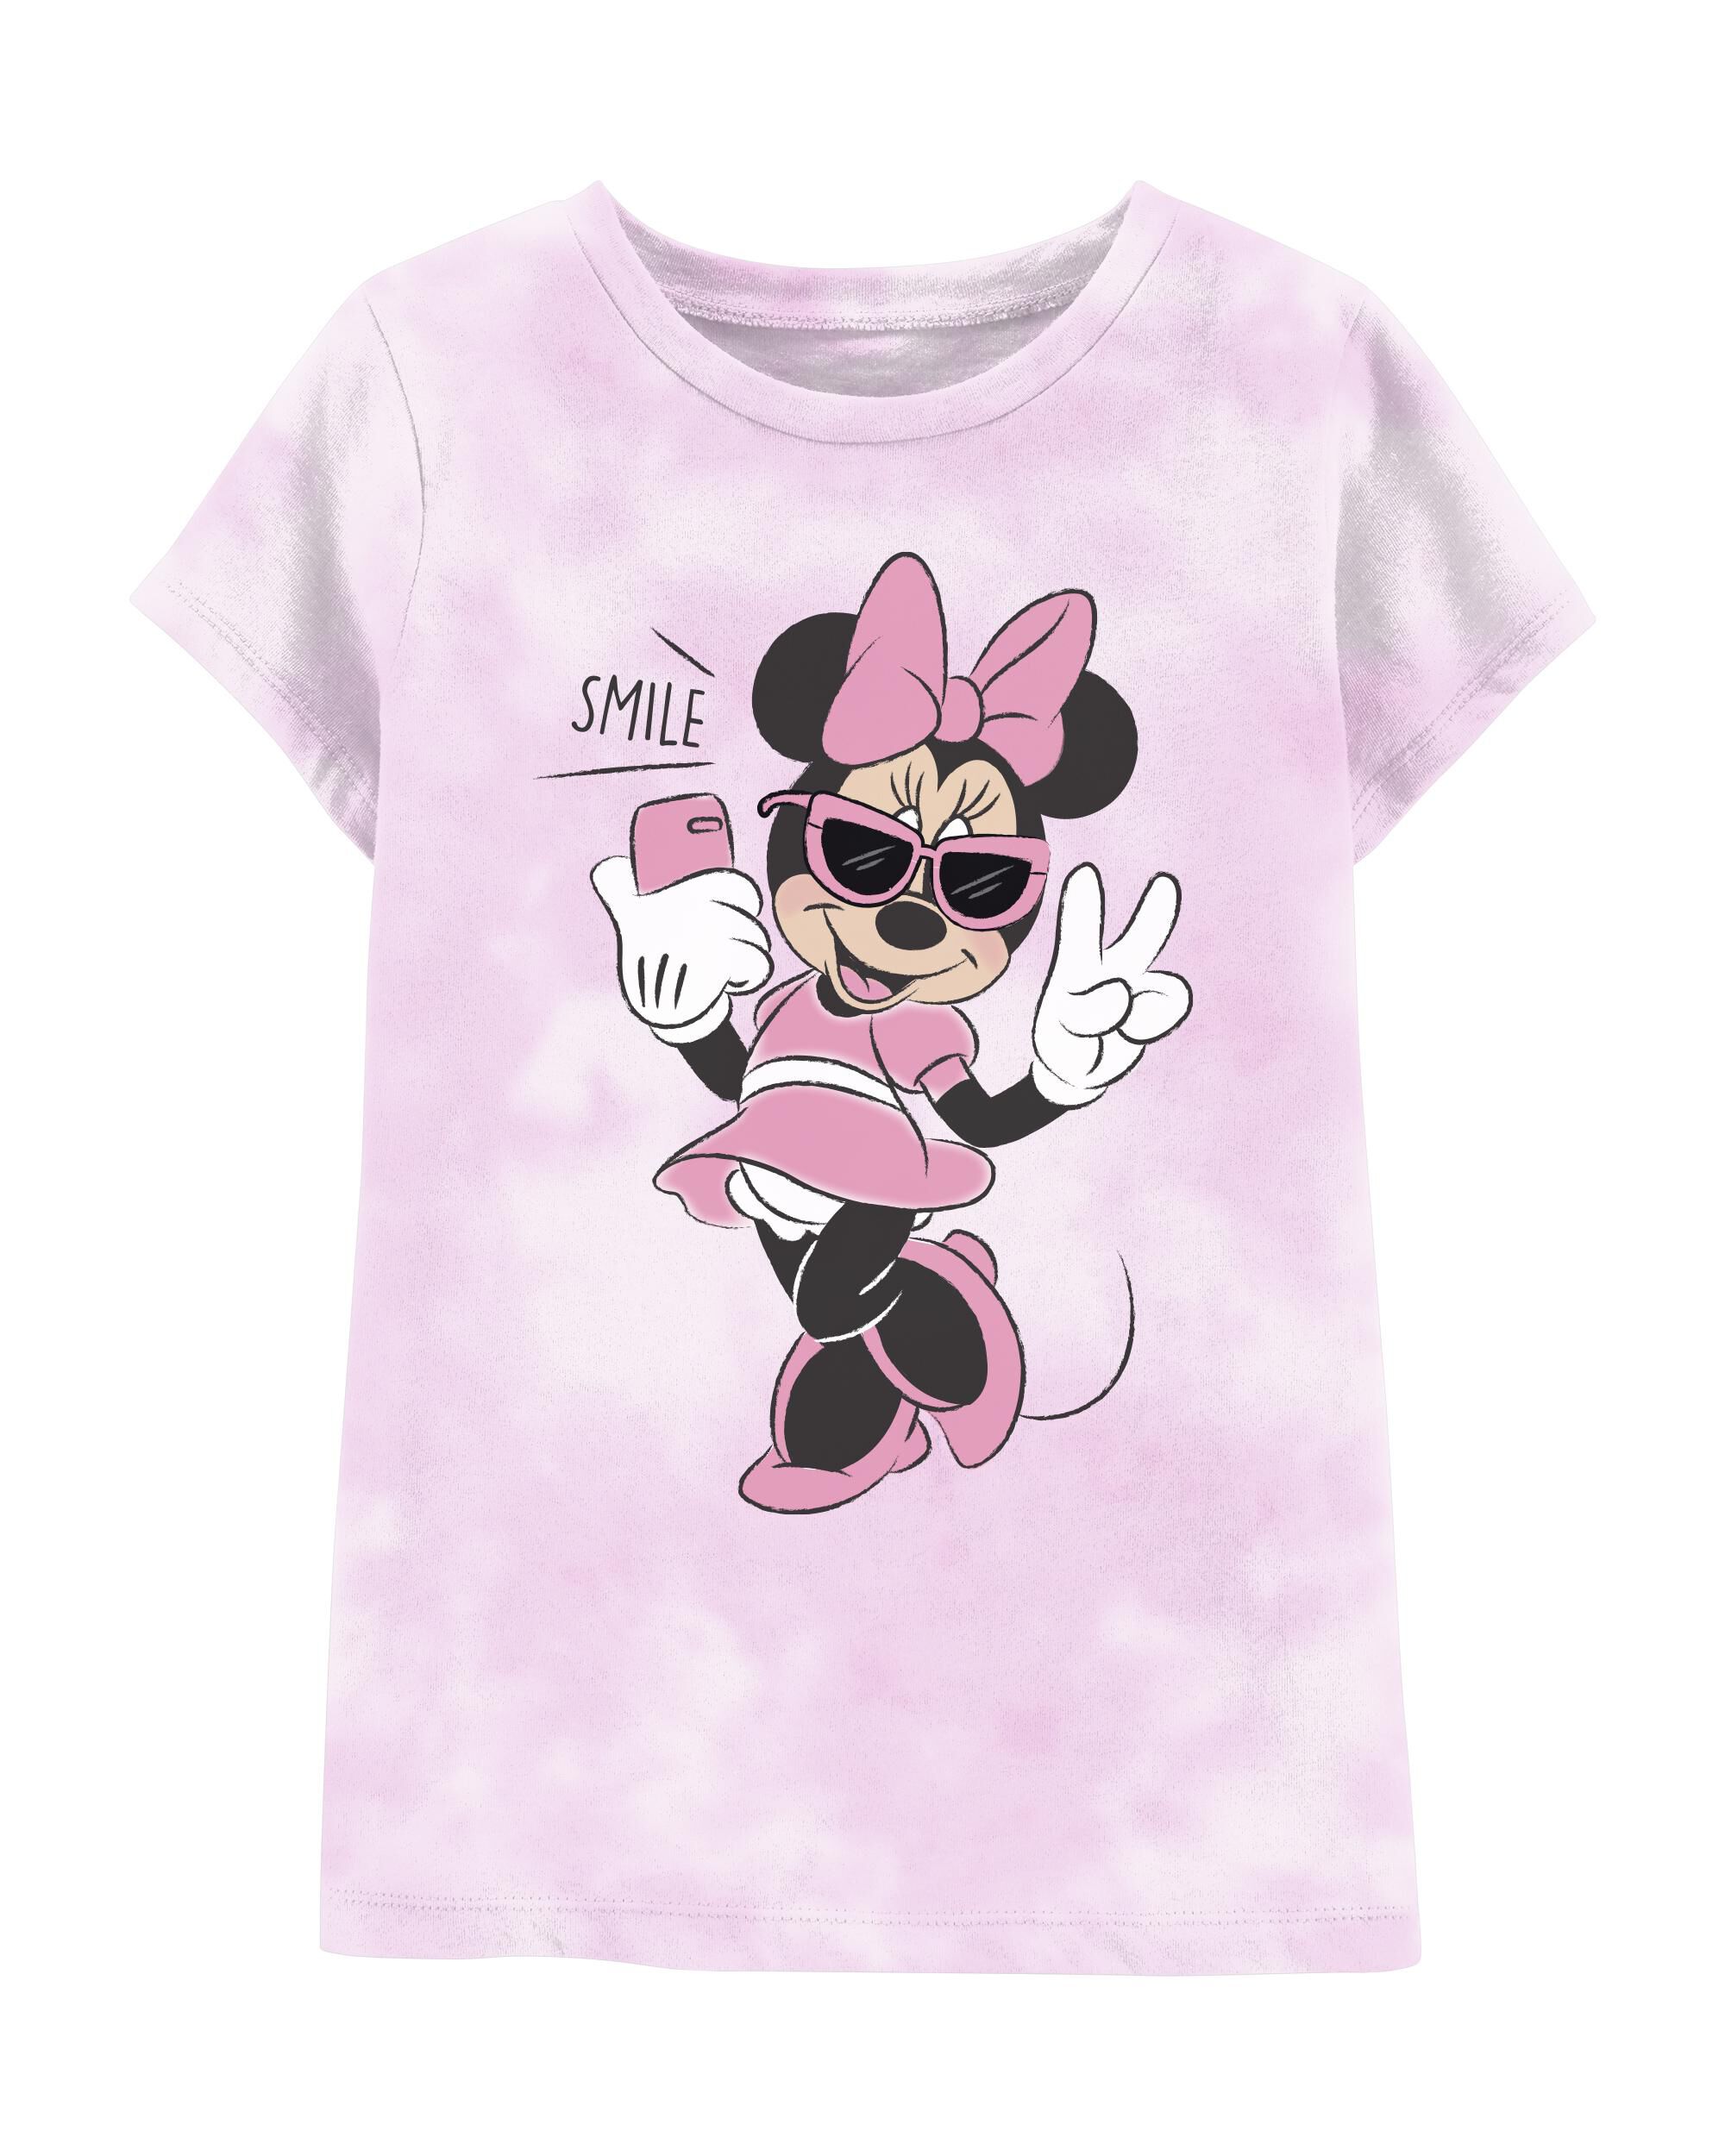 Carters Tie-Dye Minnie Mouse Tee